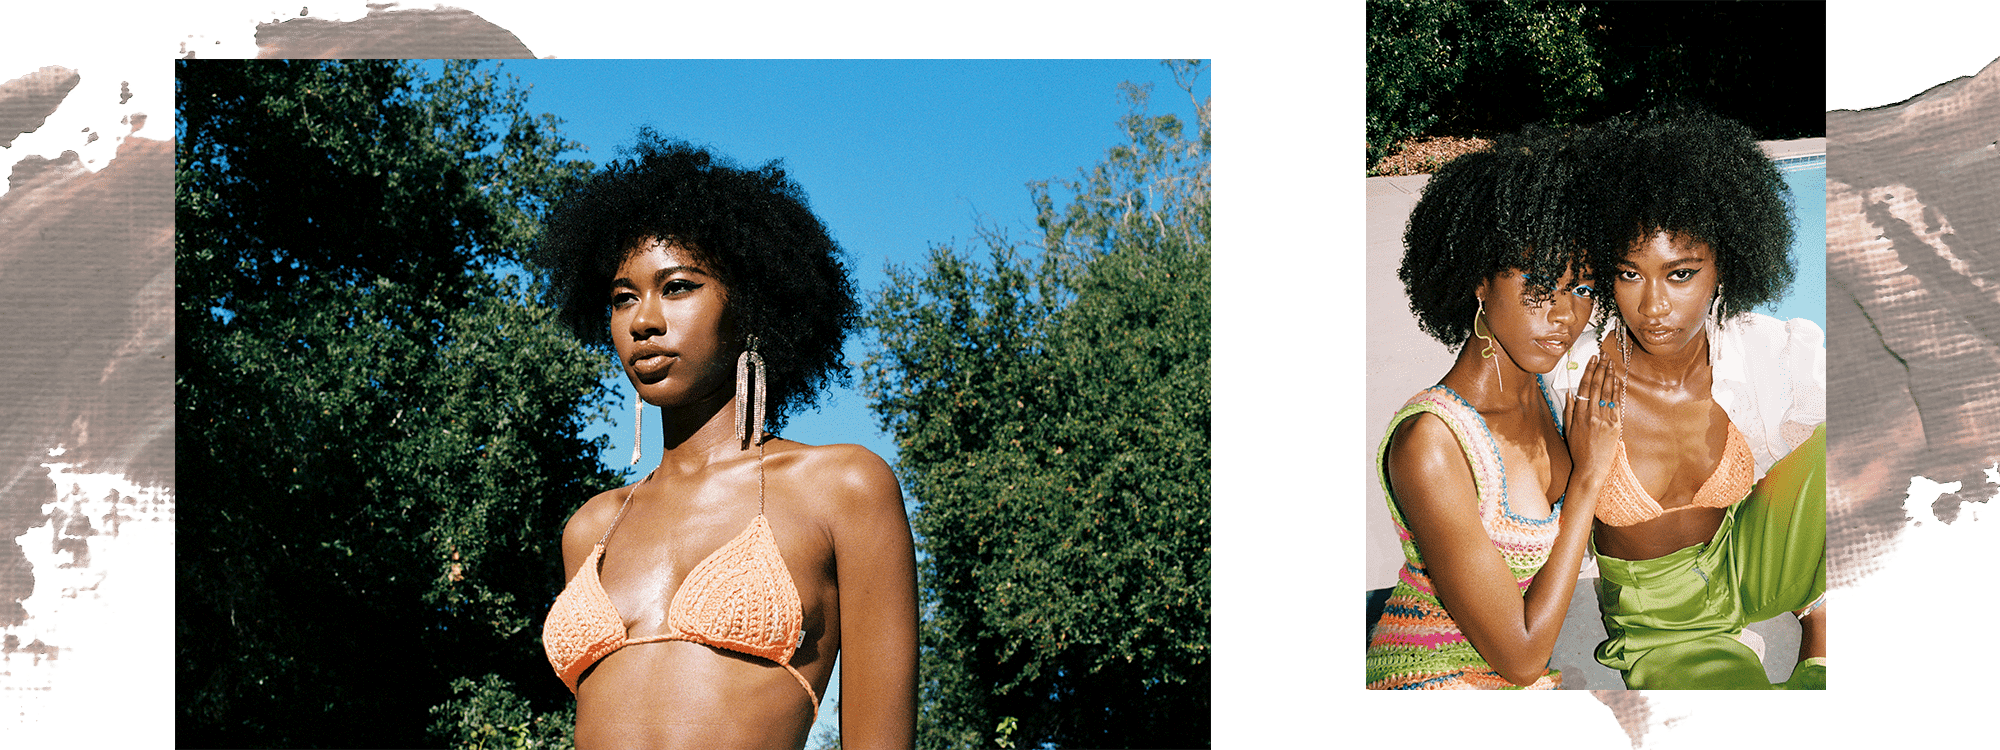 Model Amaya January stands outside in a peach crochet bikini top and silver earrings. She has brown curly hair and is standing in front of trees and a bright blue sky. In the second image she is seated next to her sister Alana January and wearing green silk pants and a white button-down shirt that is open to reveal the bikini top. Her sister is wearing a pink and green crochet dress. There is an illustration of brown and peach paint behind them.